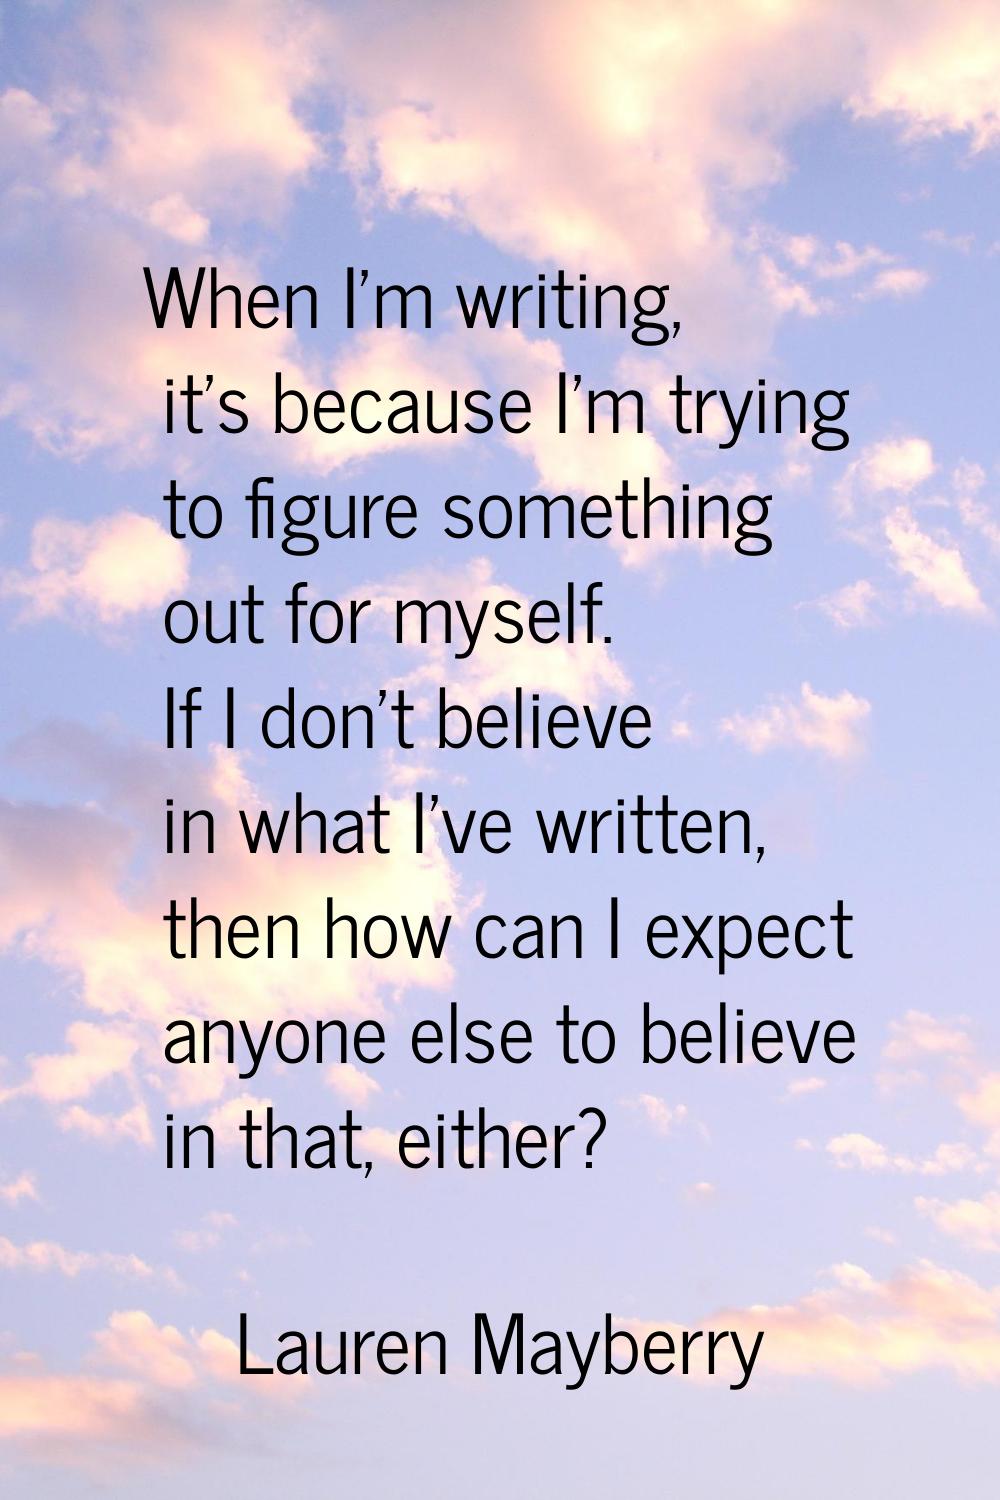 When I'm writing, it's because I'm trying to figure something out for myself. If I don't believe in